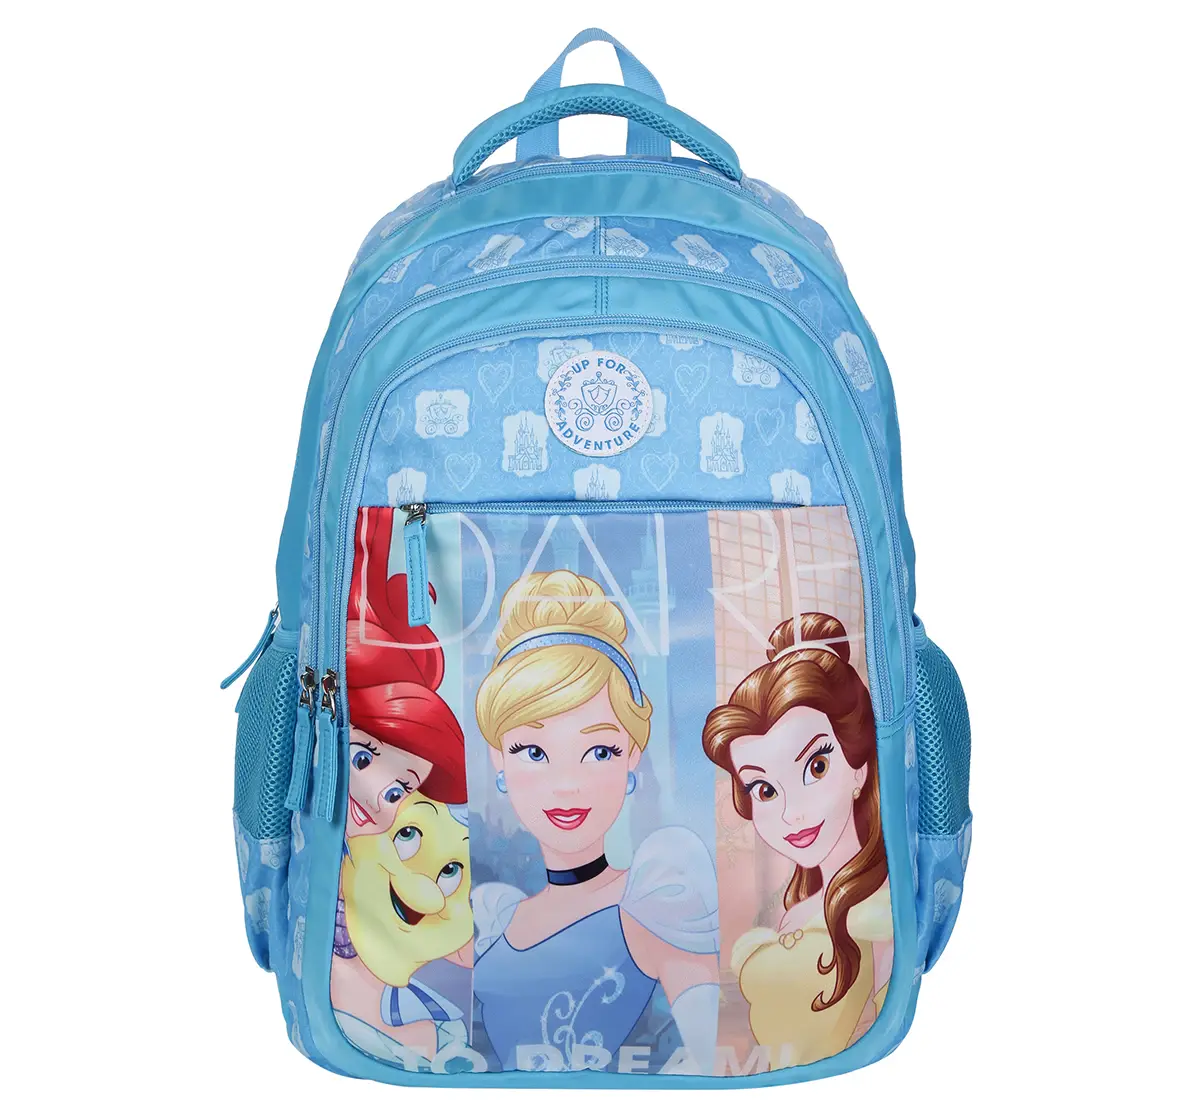 Disney Princess Adventure Blue 17" Backpack Bags for age 3Y+ 